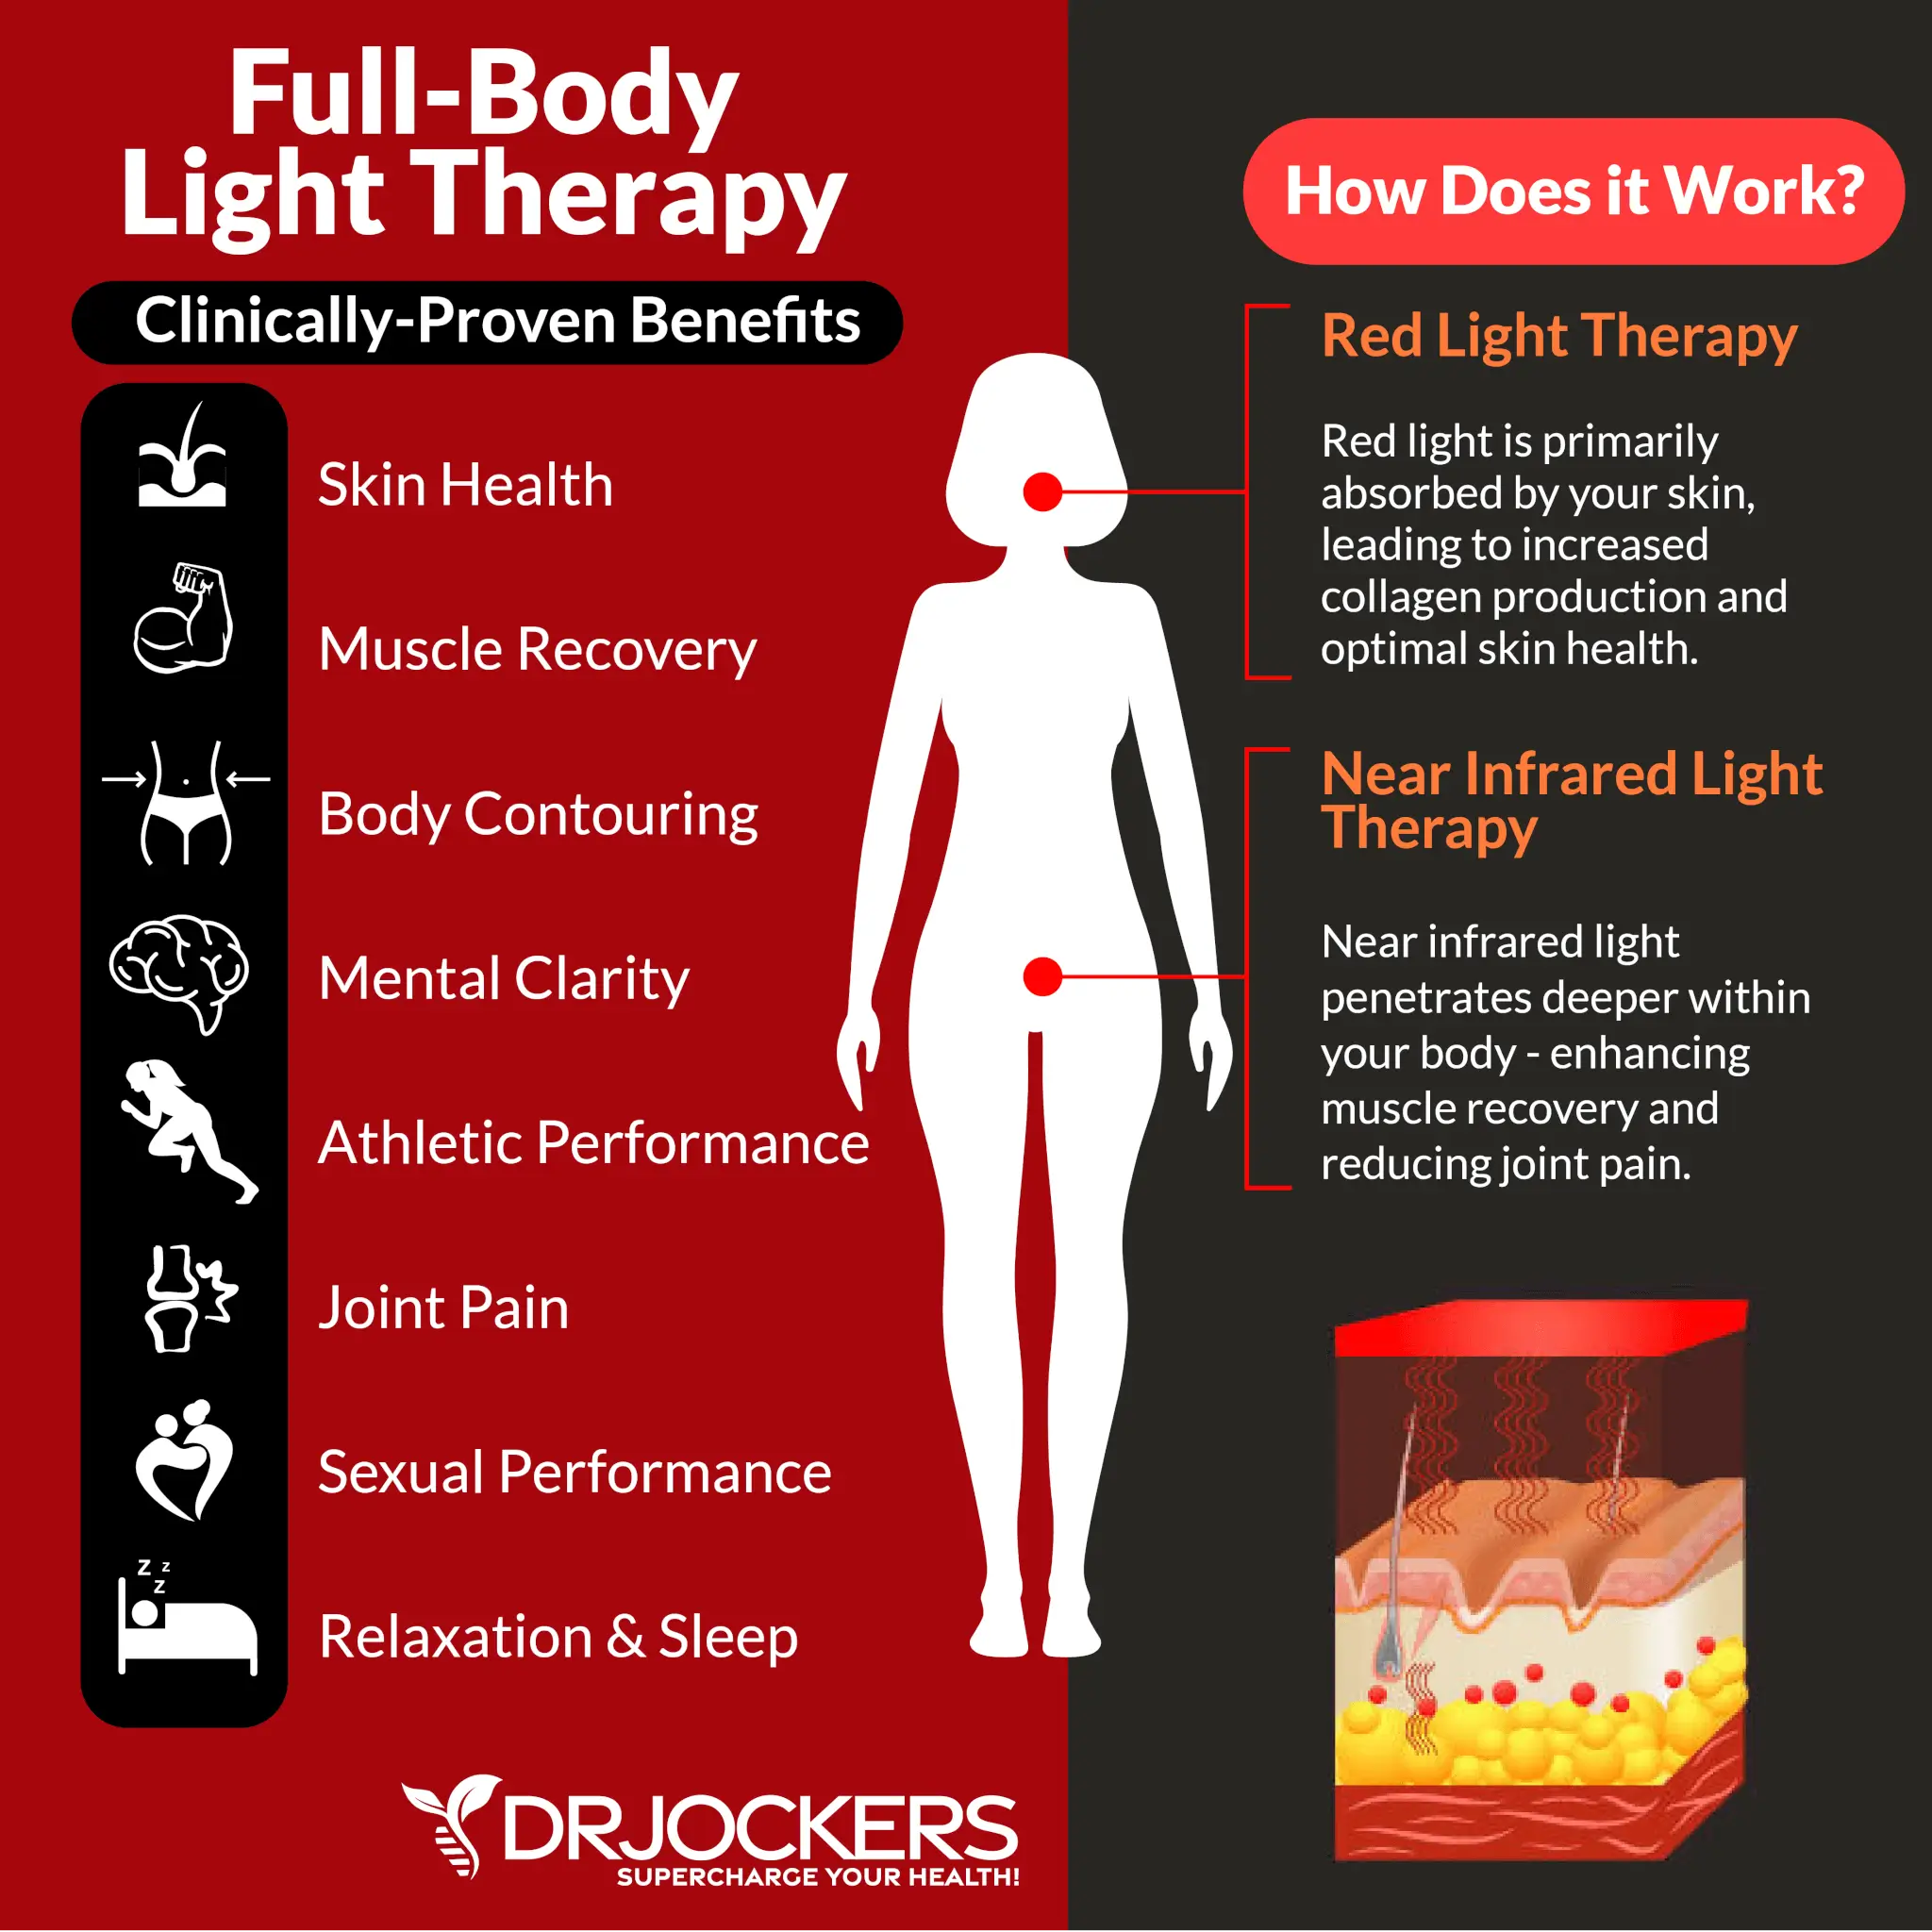 Red Light Therapy: Benefits, Risks, Costs and More - Parade